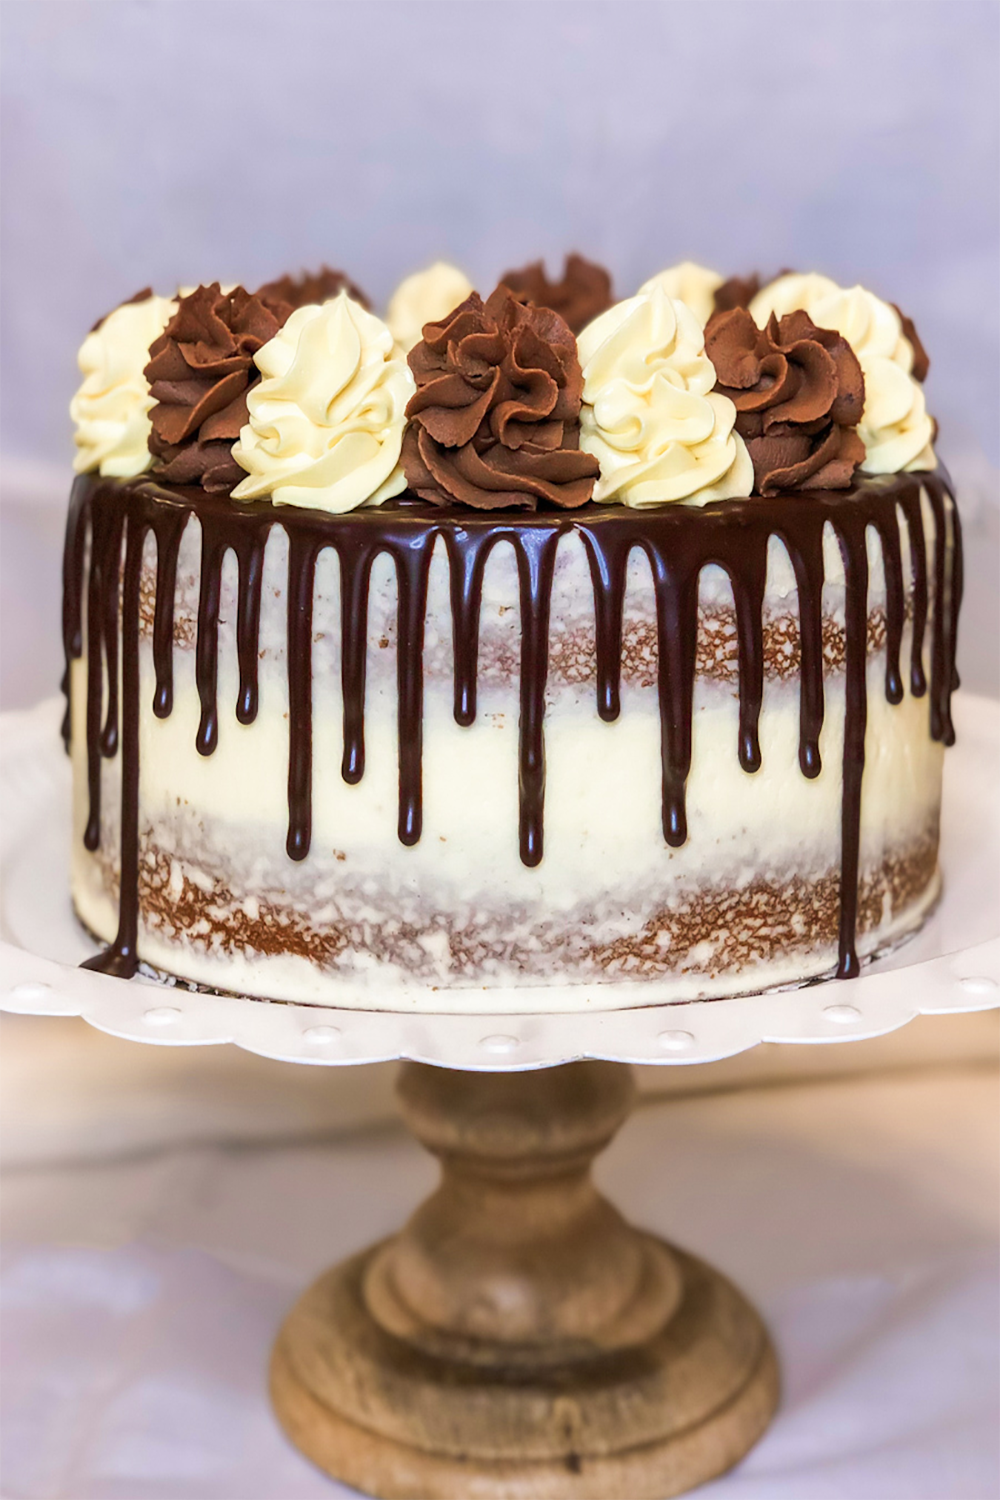 A double 8 inch Boston Cream Pie on a cake stand.  The cake stand has a scalloped white rim and light wooden turned base.  The cake is crumb-coated with vanilla buttercream frosting.  Dark chocolate ganache drip on the top and sides.  Topped with chocolate buttercream swirls and vanilla custard swirls. 